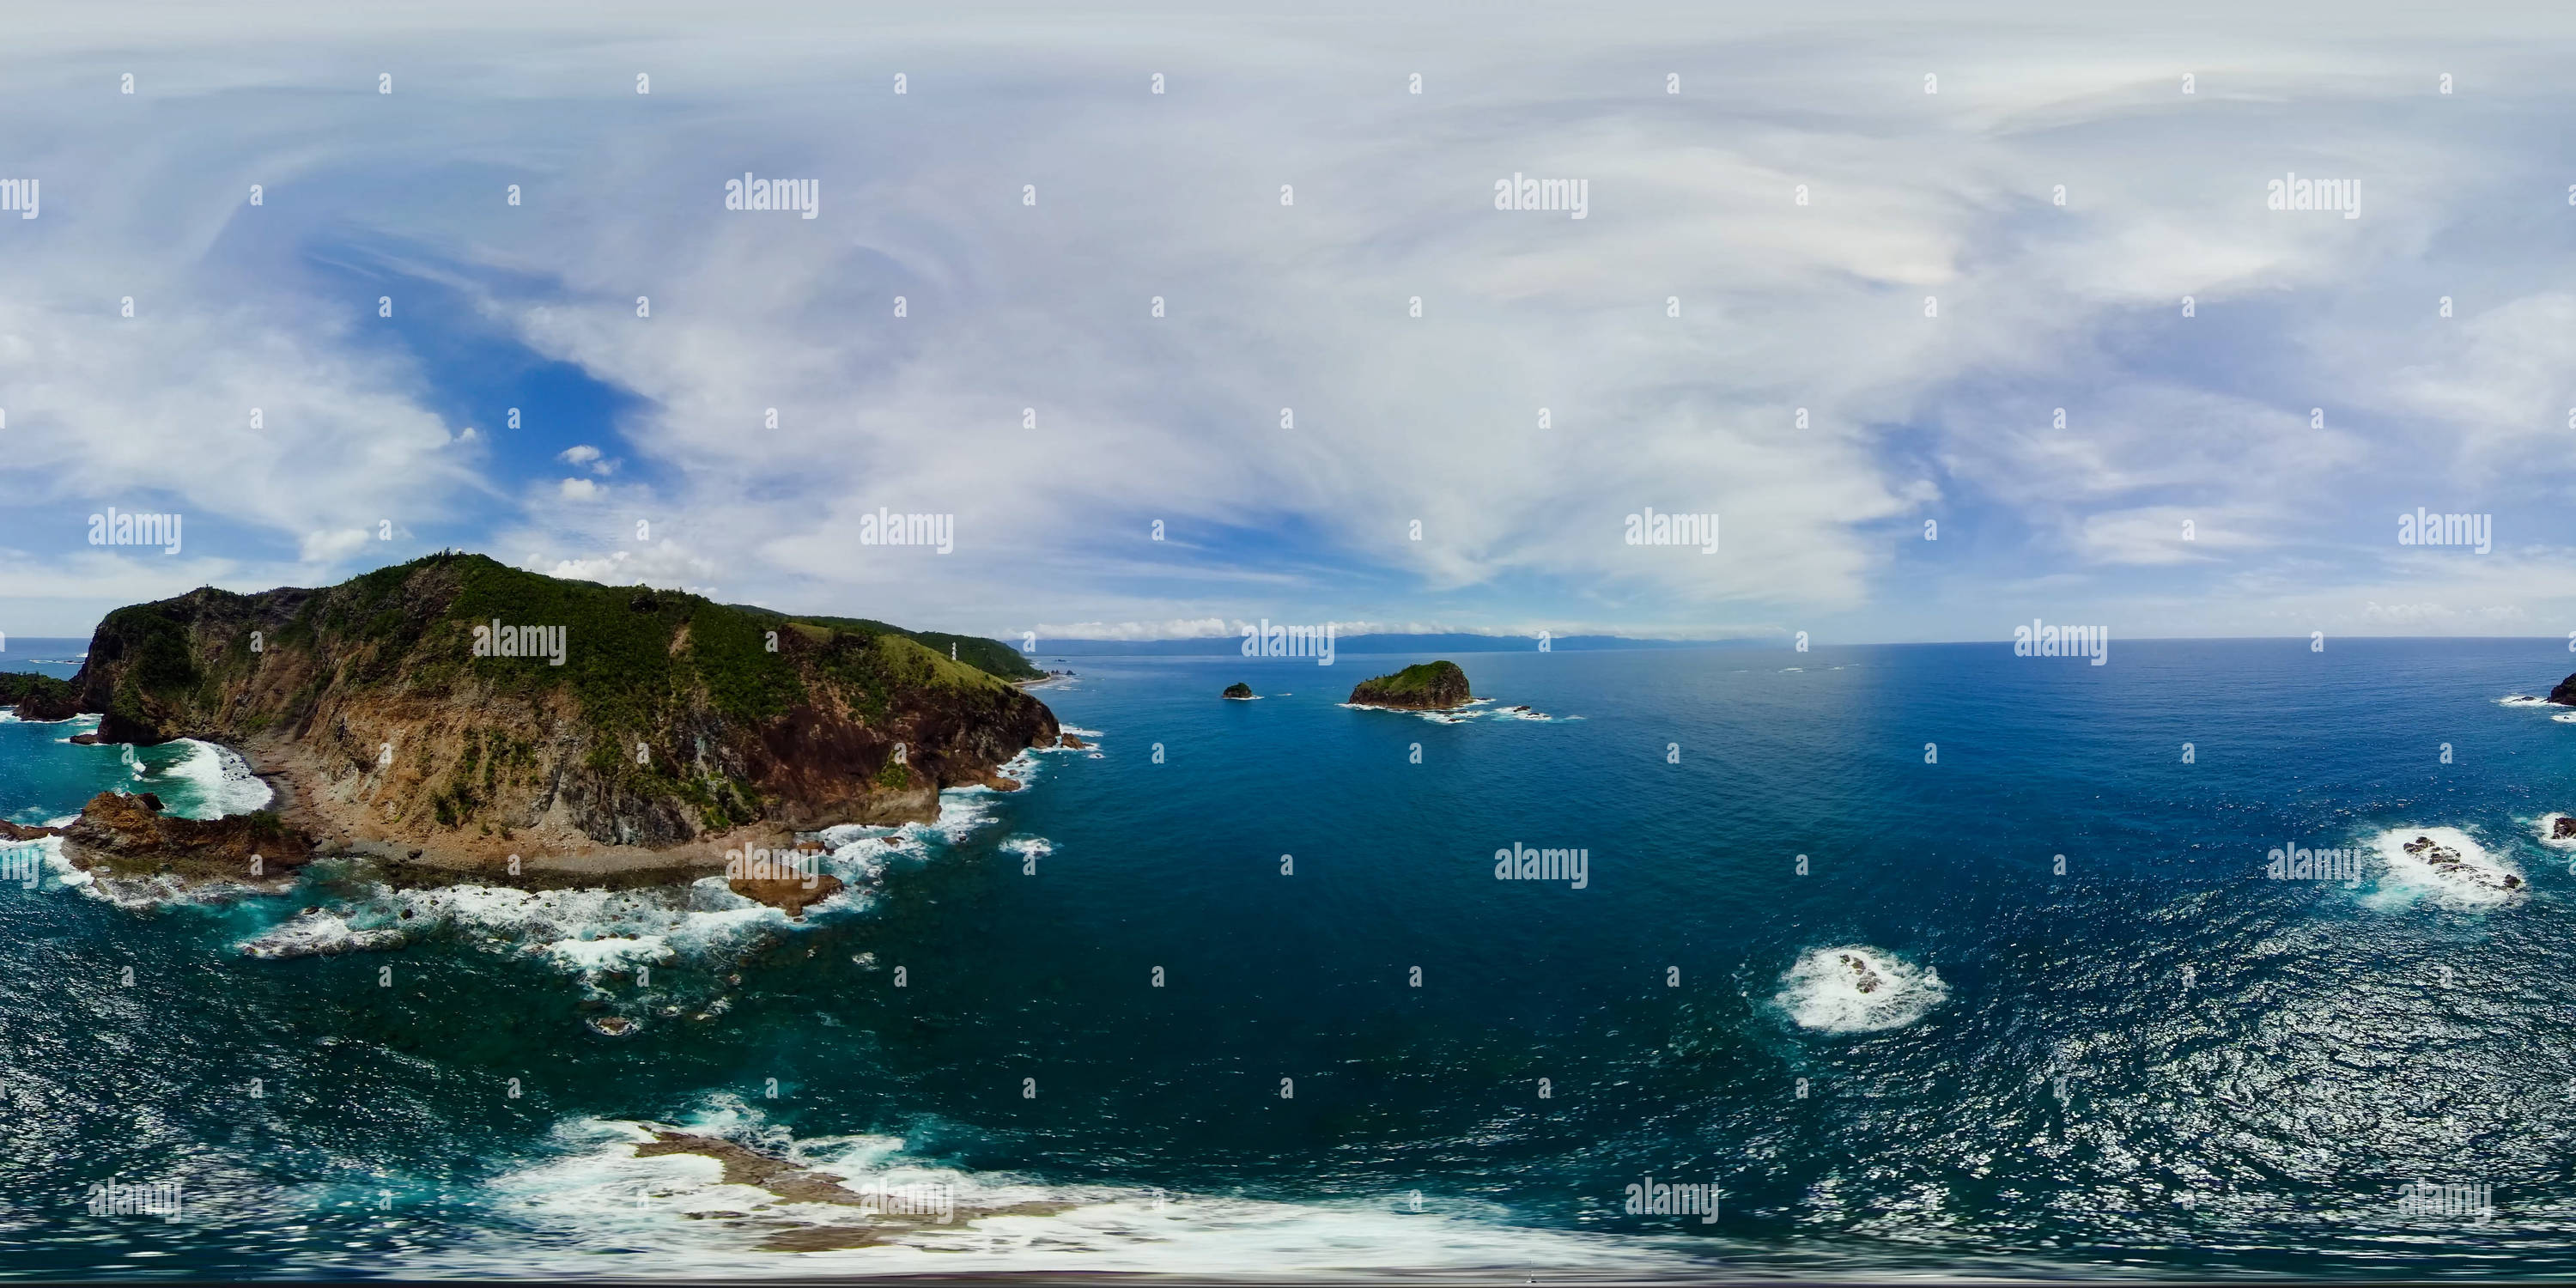 360 degree panoramic view of Sea surf and waves on the tropical coast.